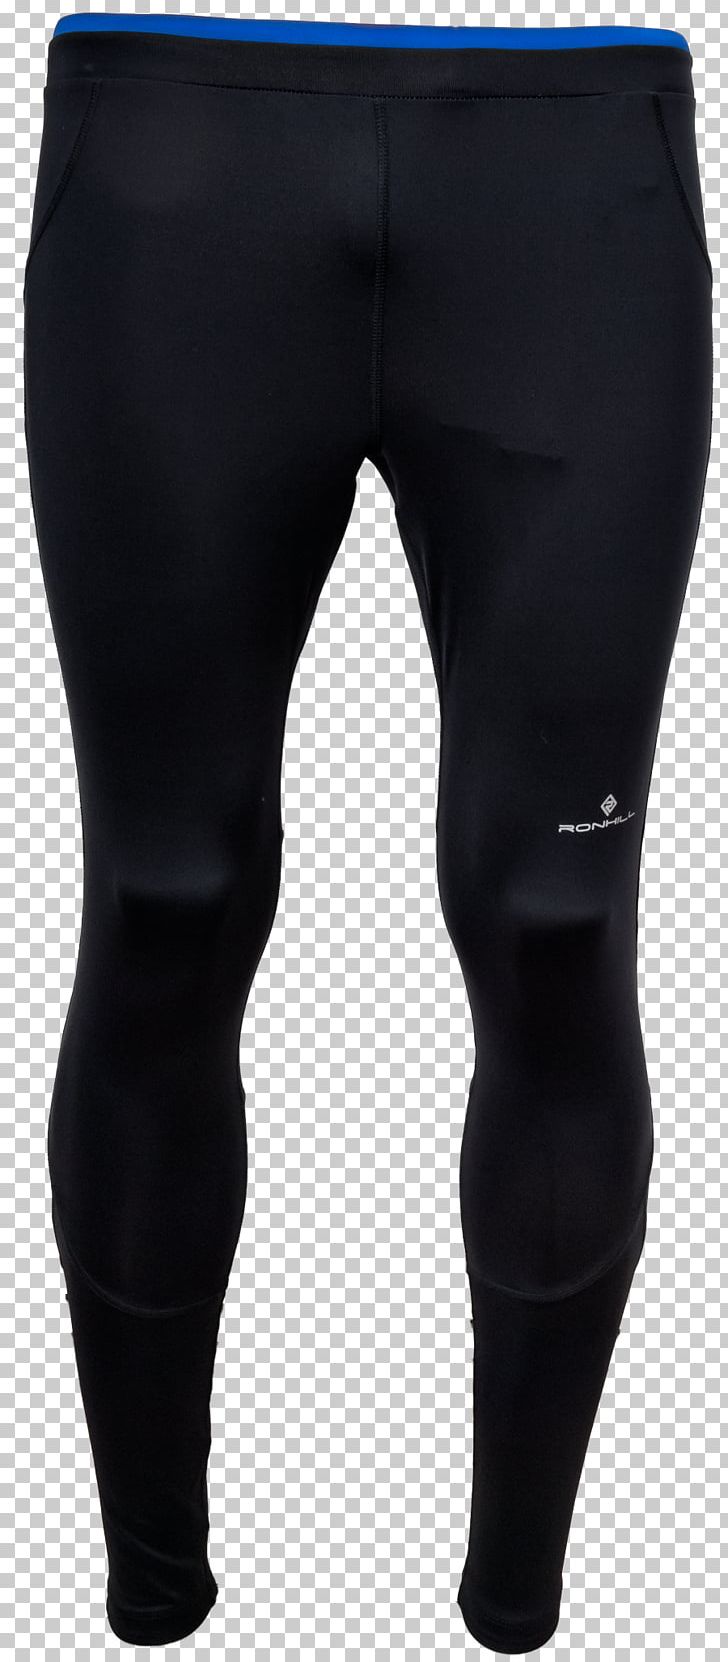 Leggings Waist PNG, Clipart, Leggings, Others, Thigh, Tight, Tights Free PNG Download